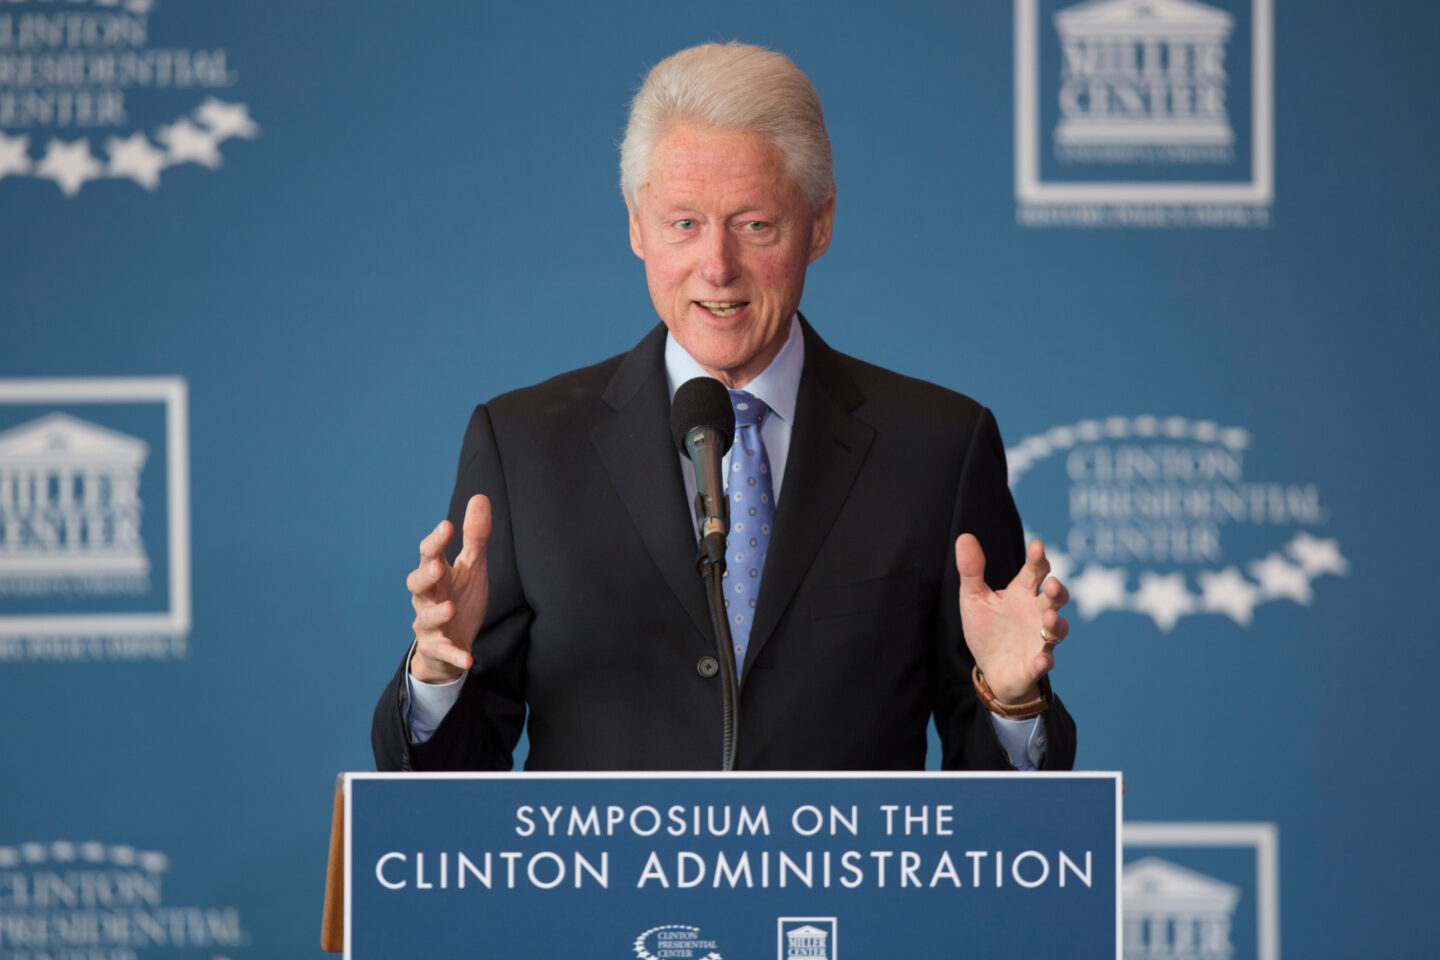 President Clinton gives remarks at an event.